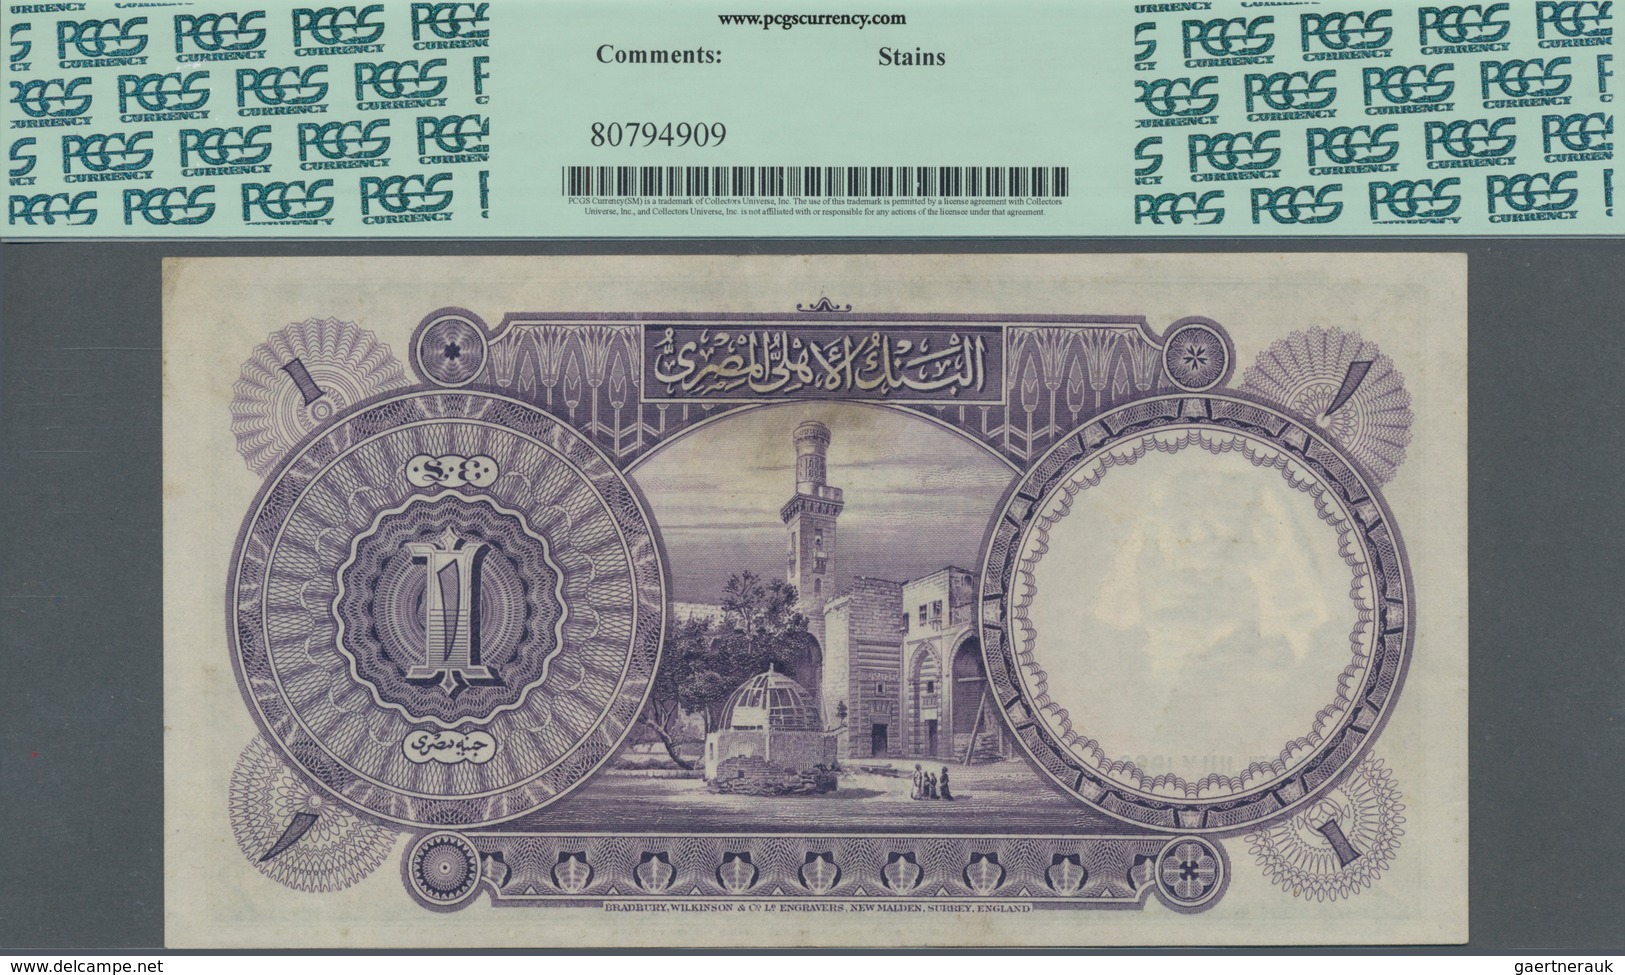 Egypt / Ägypten: The National Bank Of Egypt 1 Pound 1928, P.20, Very Popular Note In Great Condition - Egypte